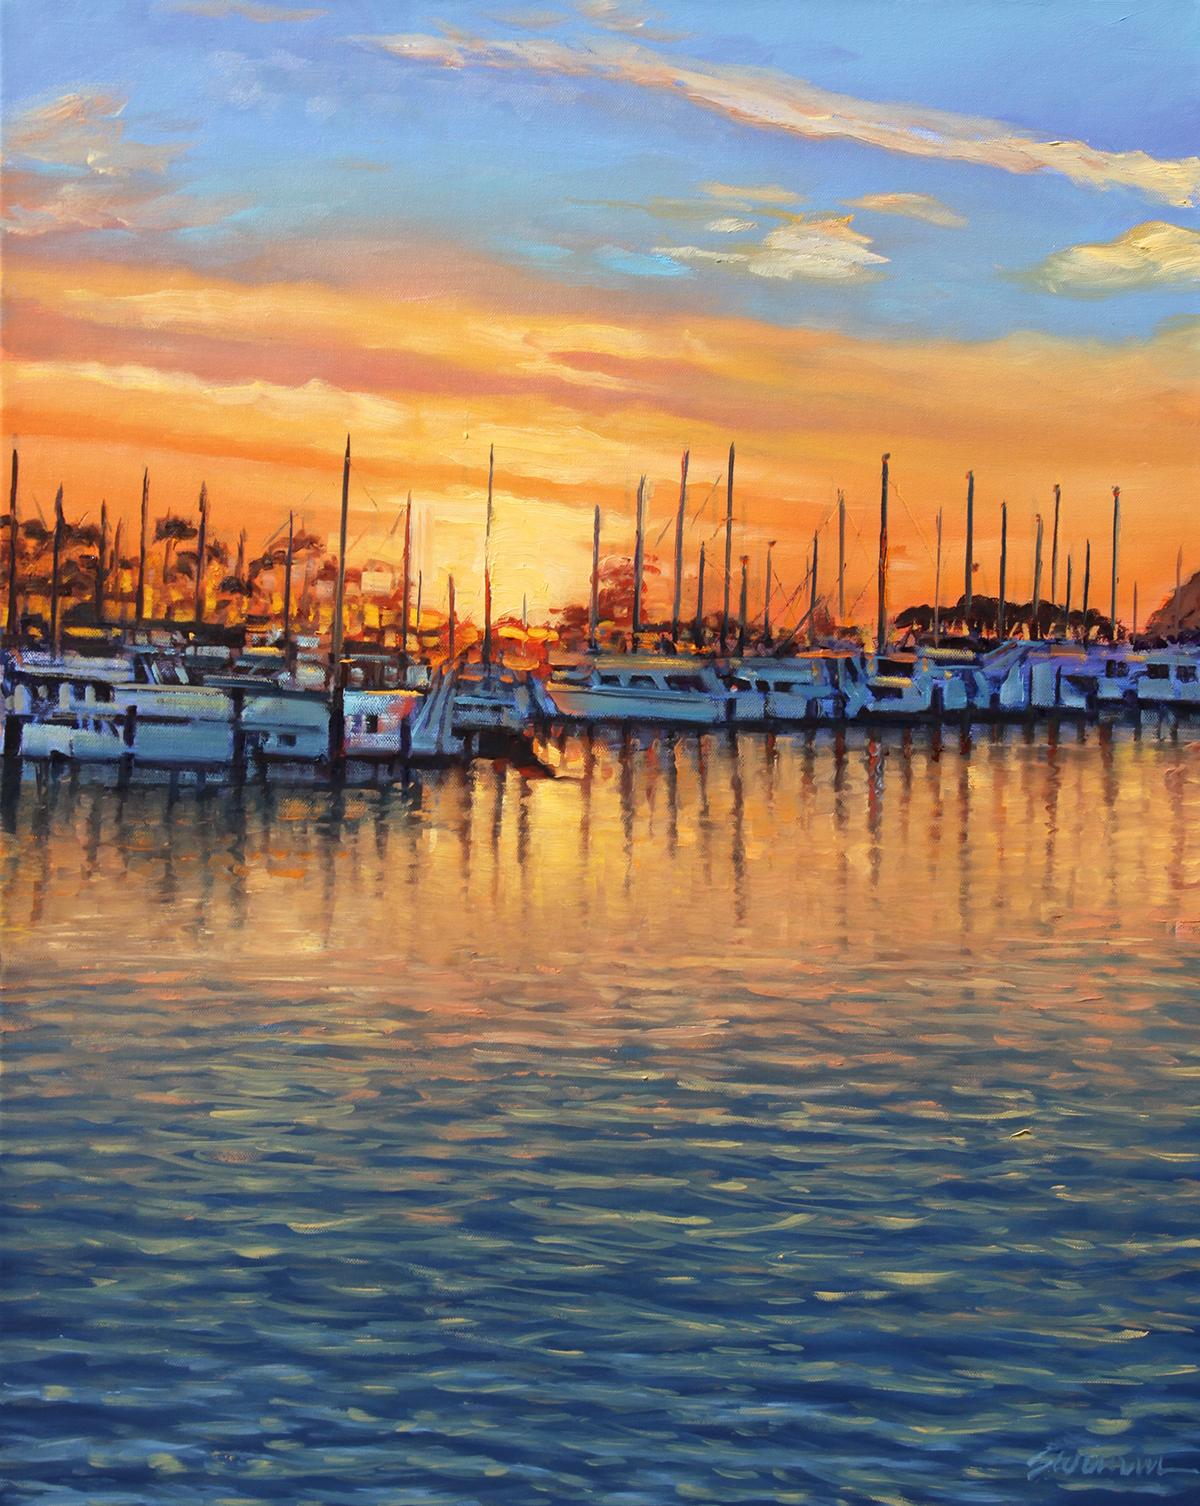 Tom Swimm Landscape Painting - "Shimmering Sunset"  Sailboats Tied Up With Glowing Water Reflections